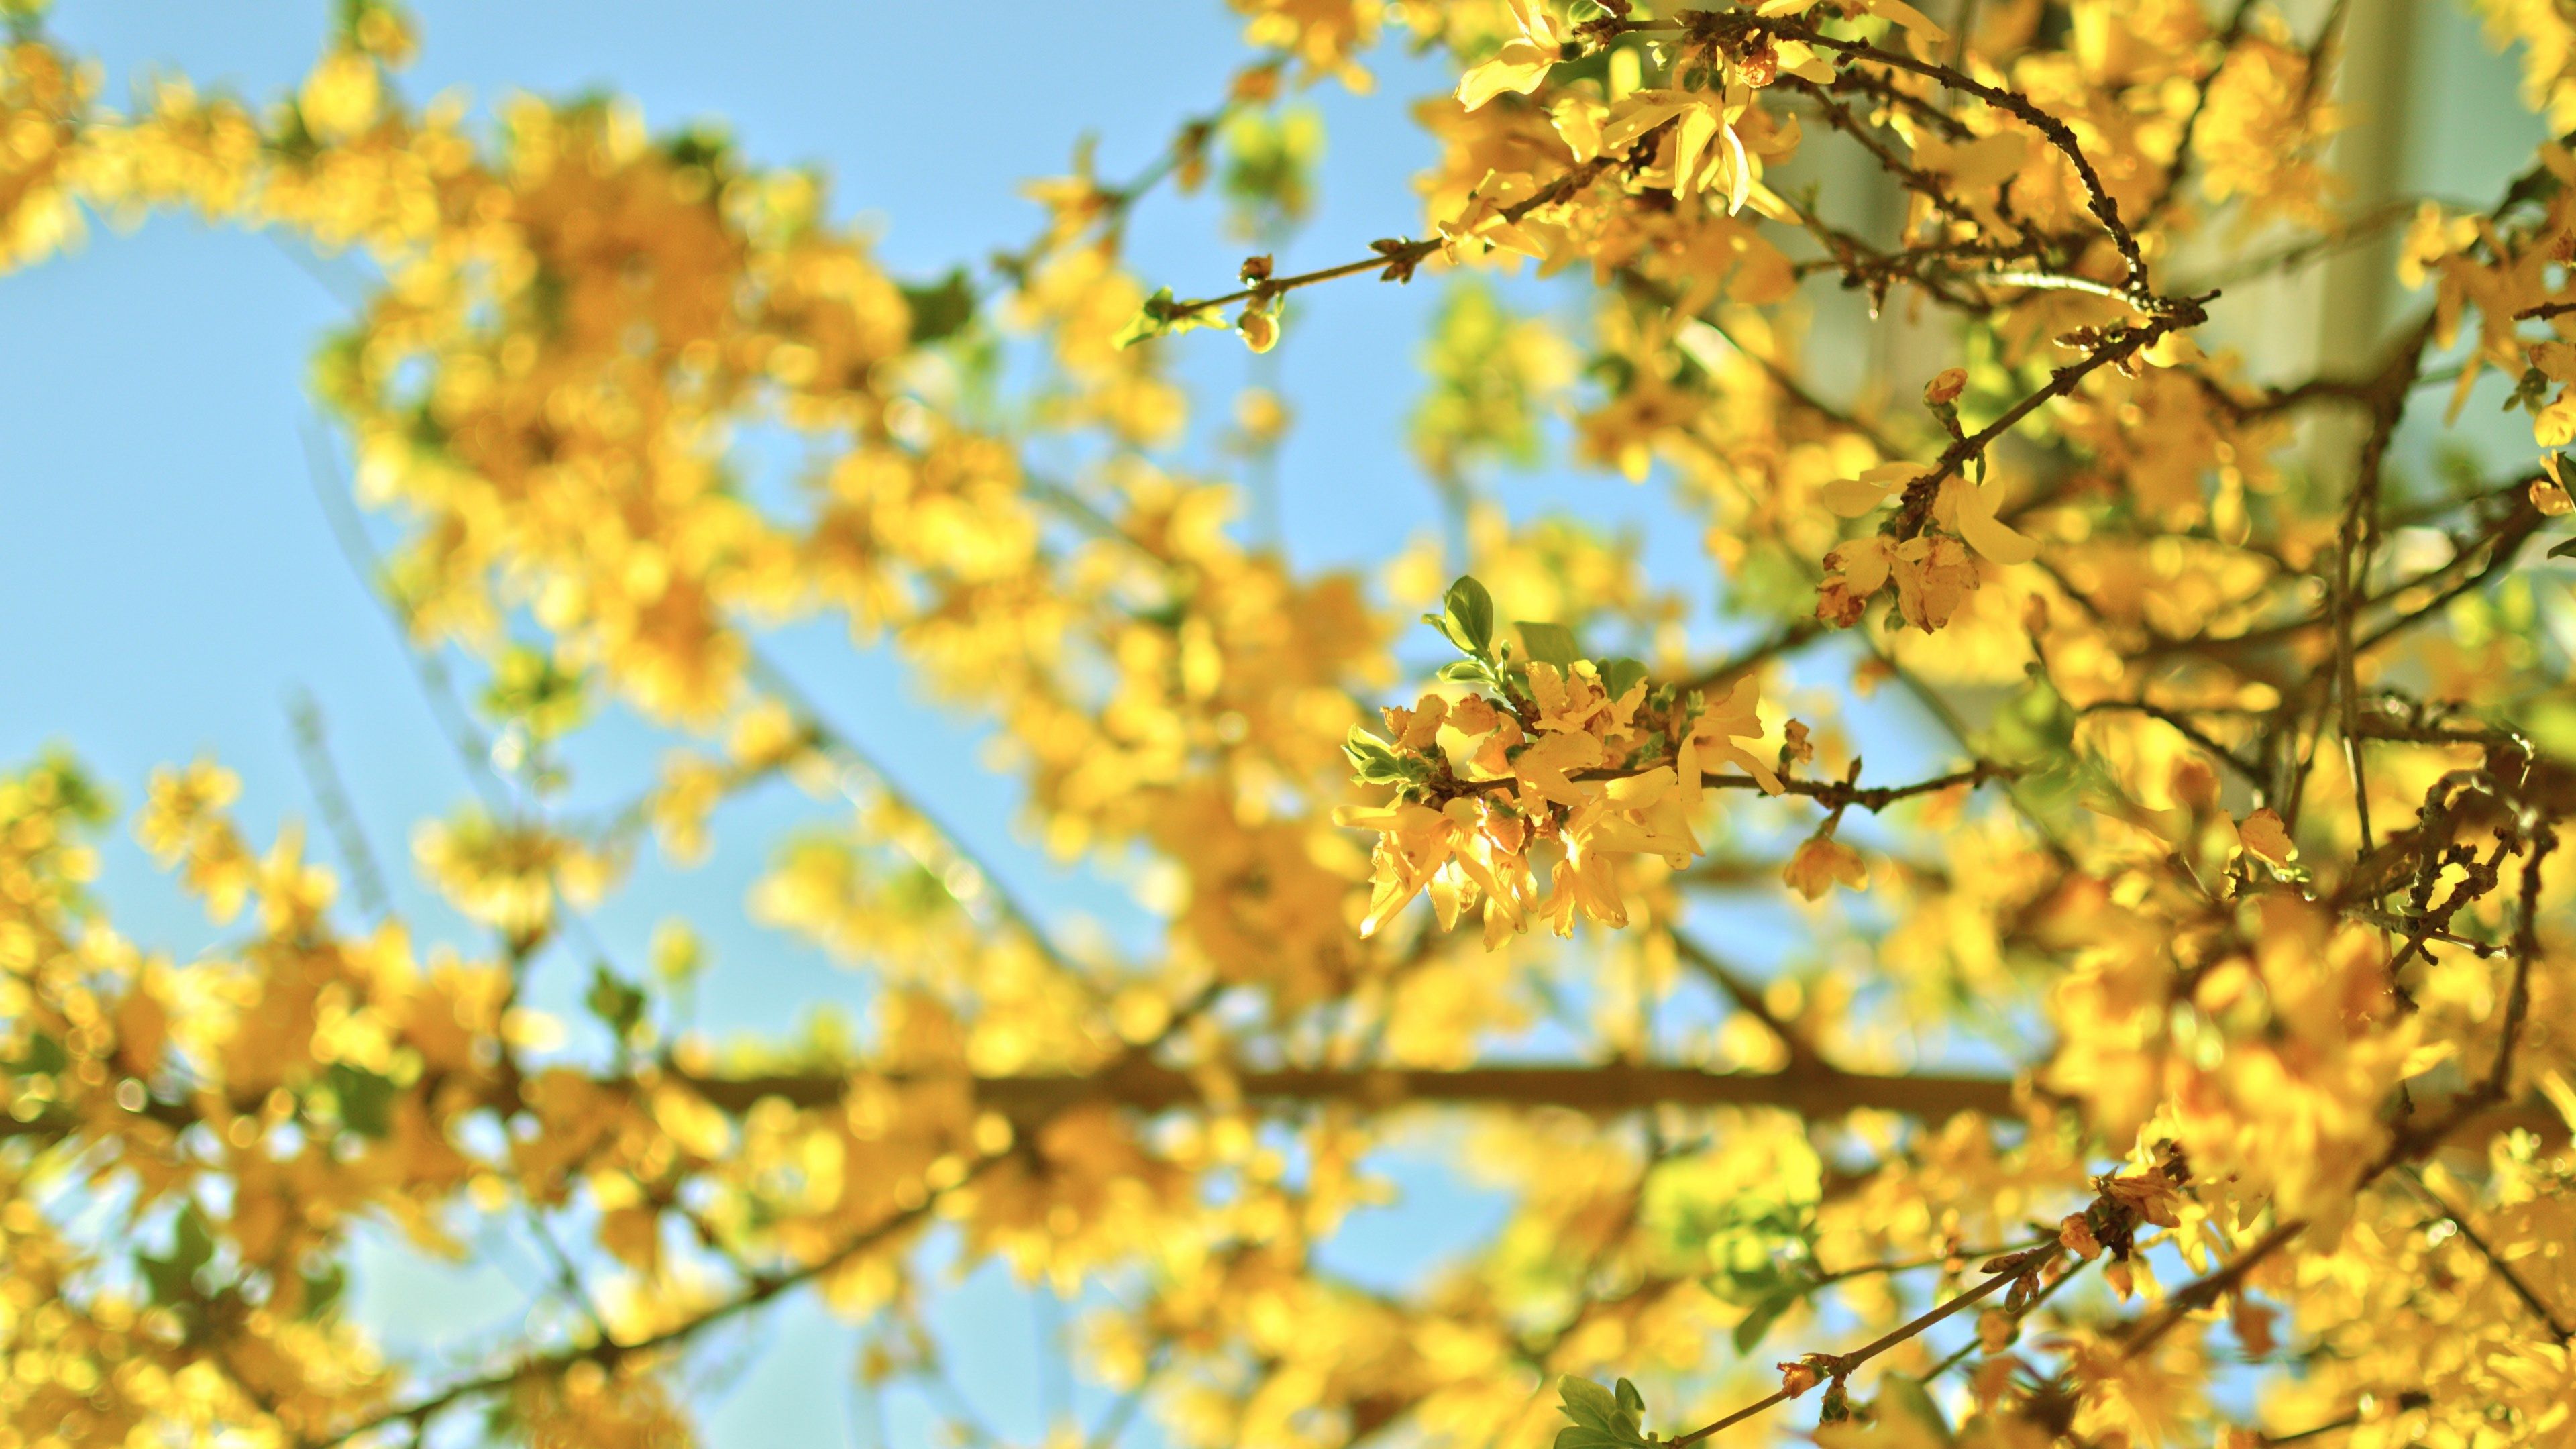 A yellow tree with flowers on it - Light yellow